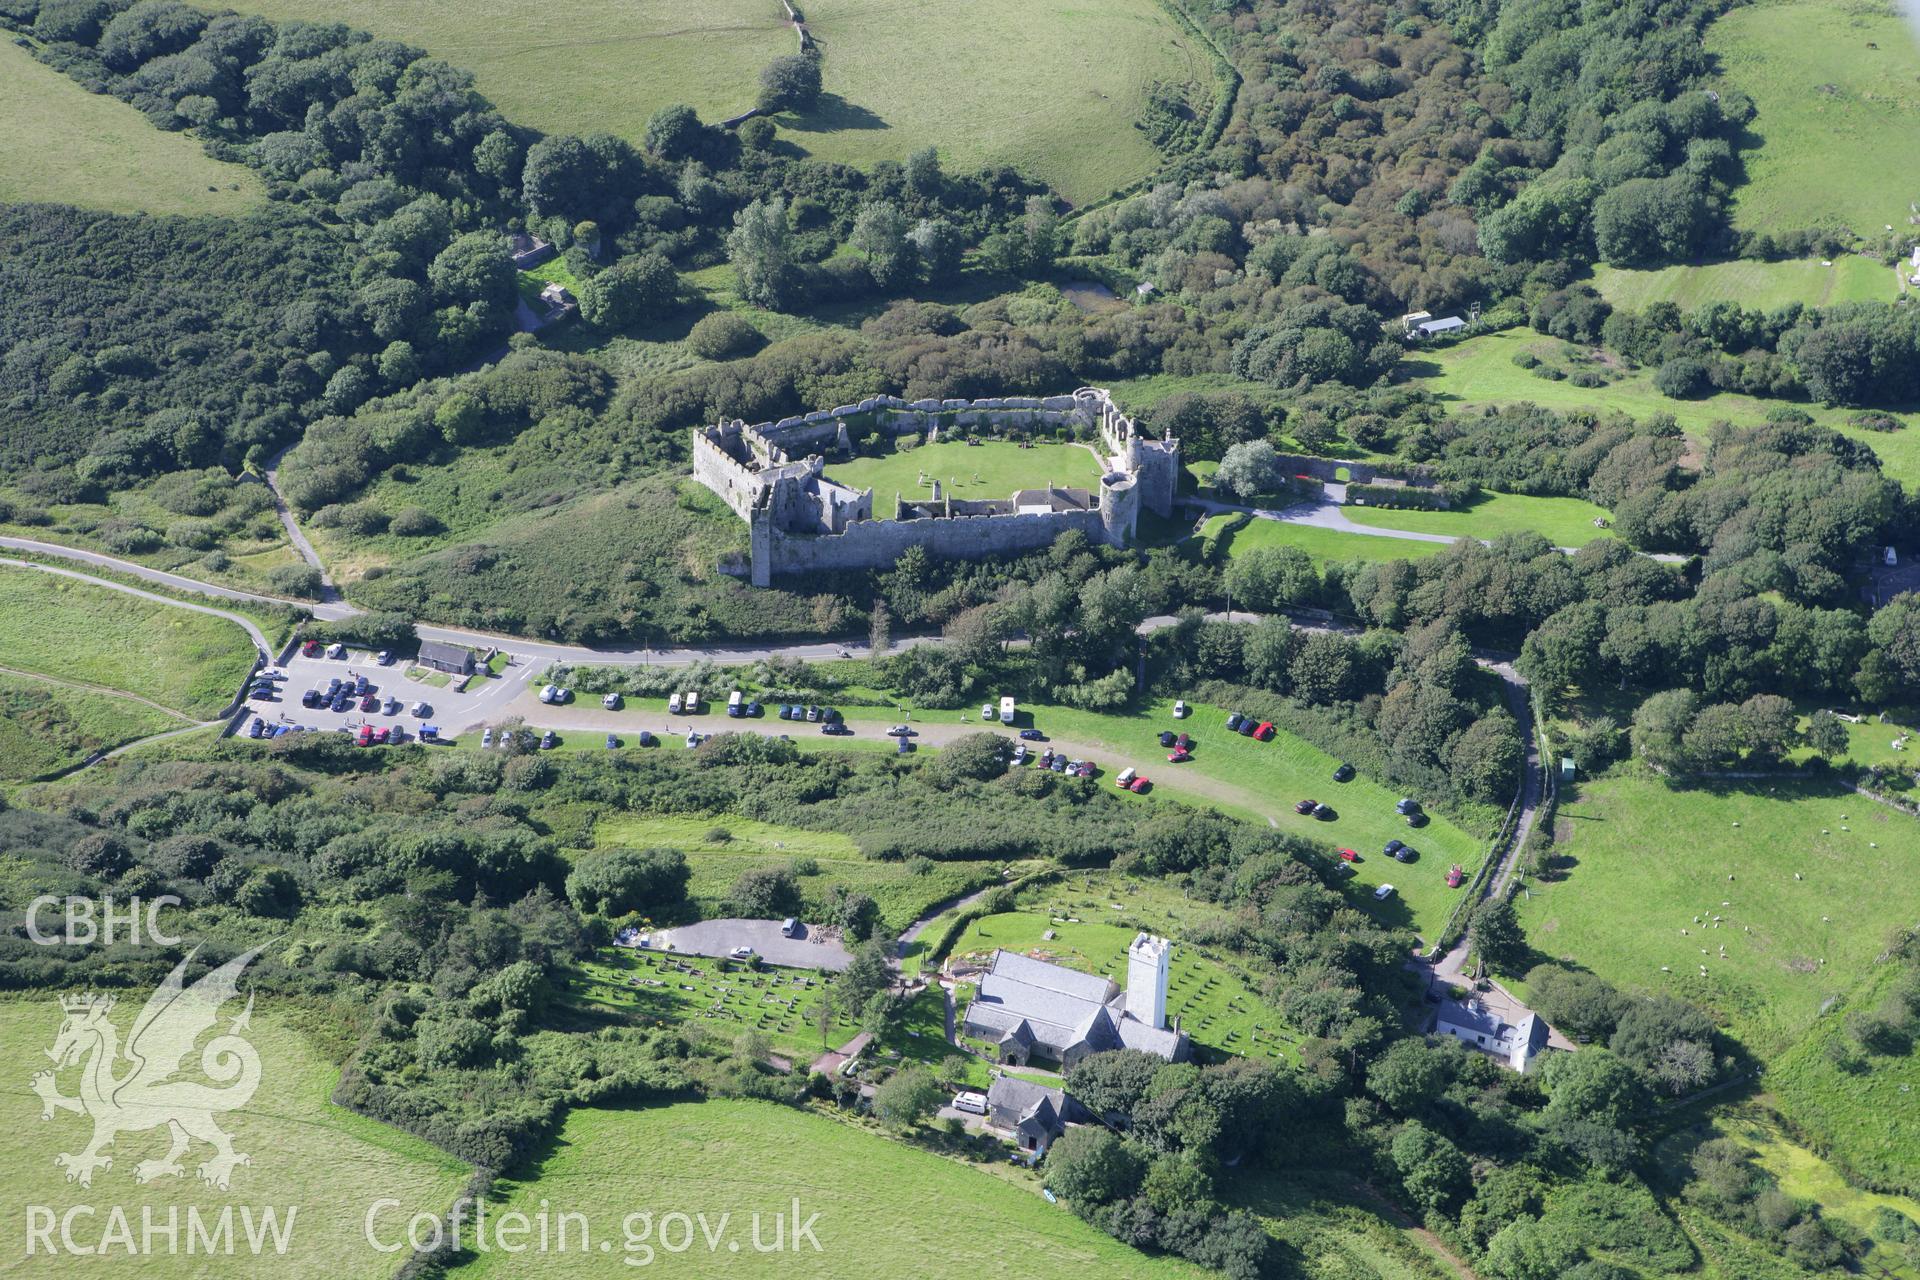 RCAHMW colour oblique aerial photograph of Manorbier Castle, viewed from the south-east. Taken on 30 July 2007 by Toby Driver